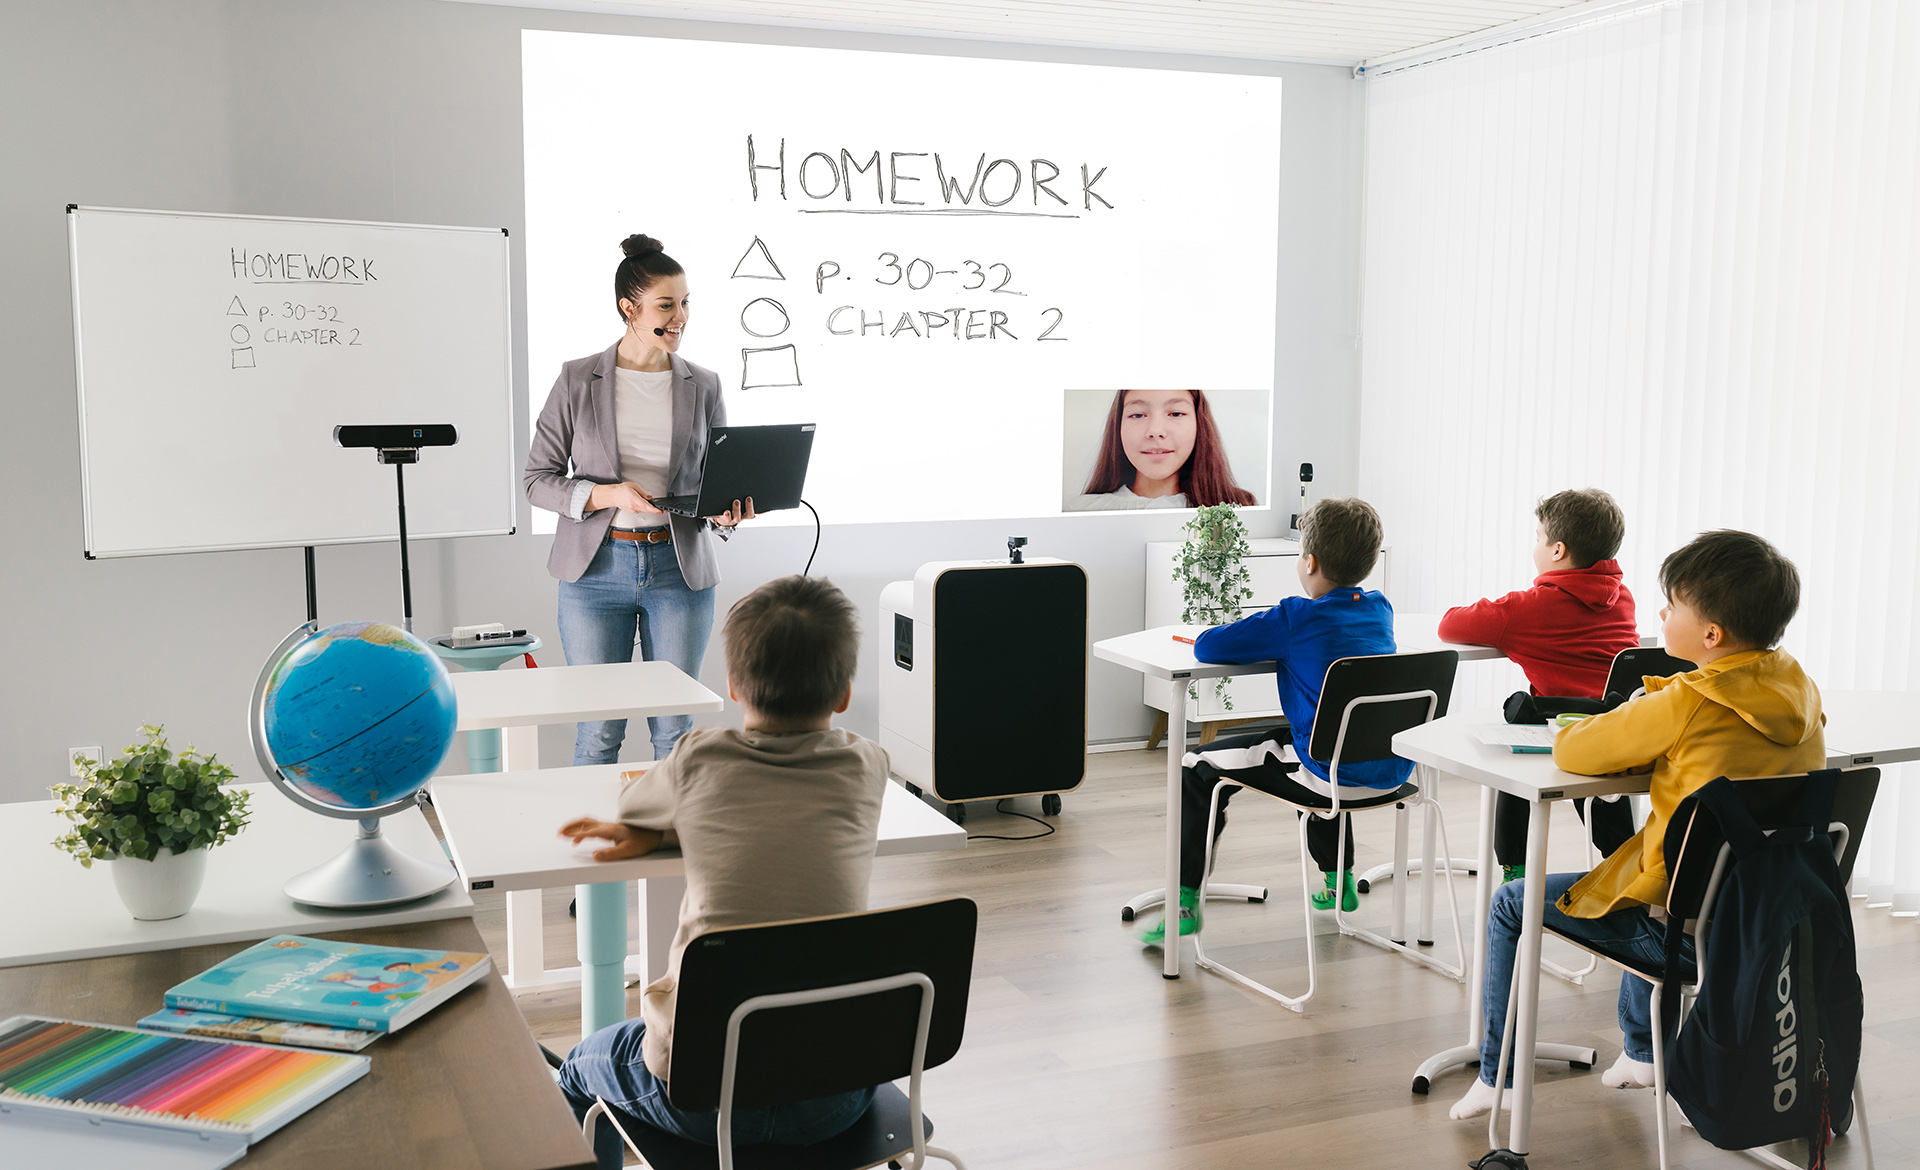 Picture from classroom where is going hybrid learning session and the teacher is using all-in-one audiovisual solution, Artome M10.